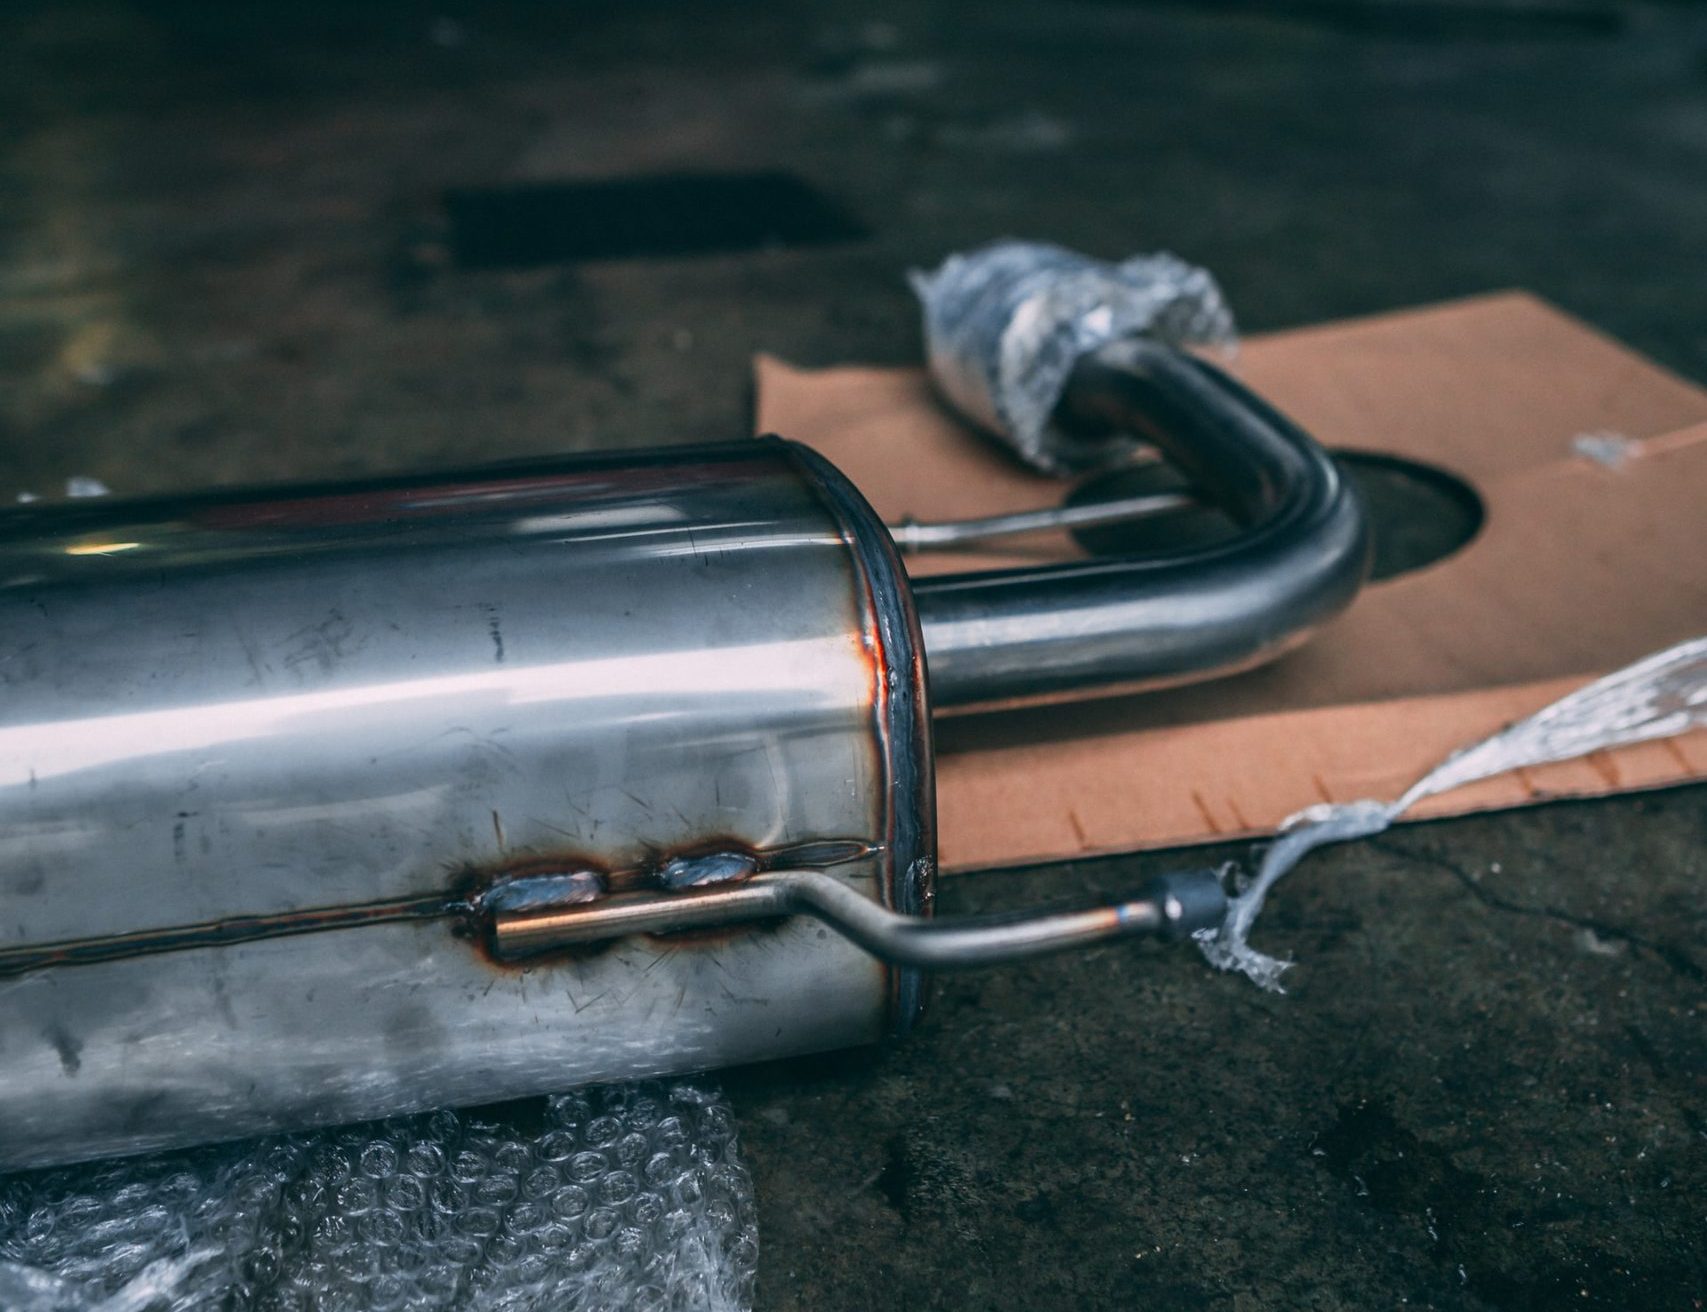 Borla vs. MagnaFlow: Which Exhaust System Should You Get?